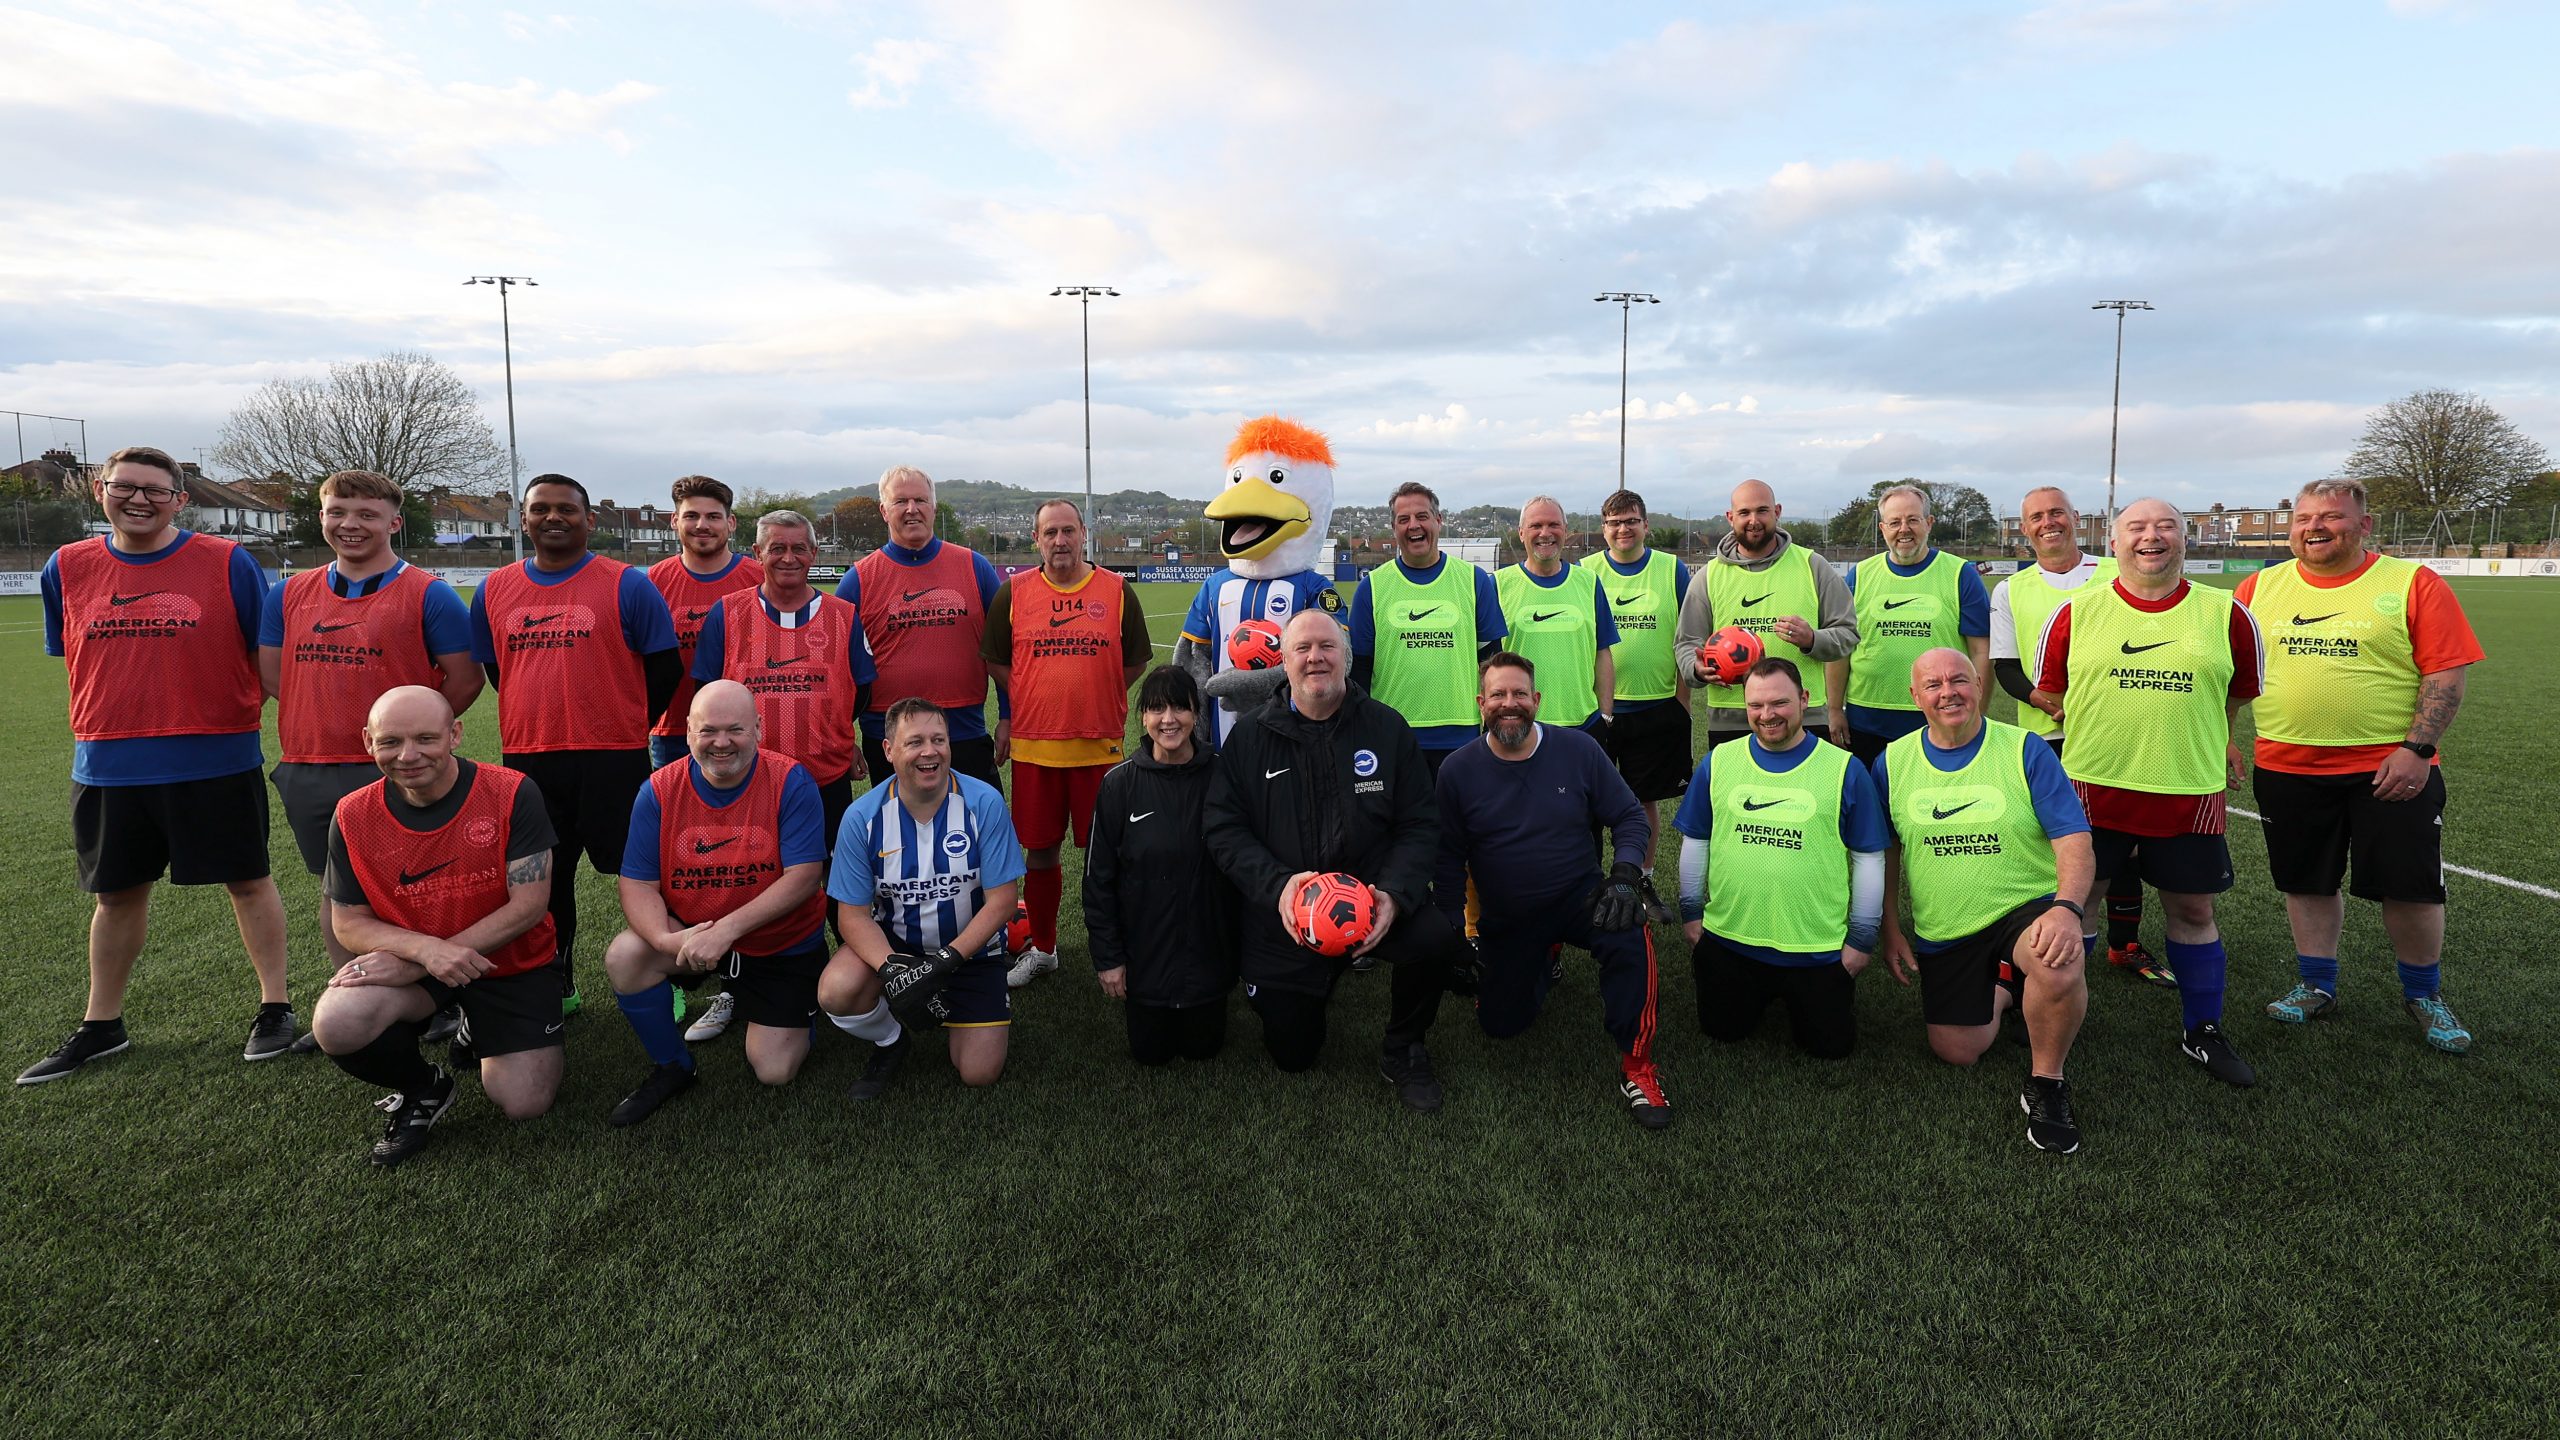 Weight loss group raises over £1k for AITC at charity football match